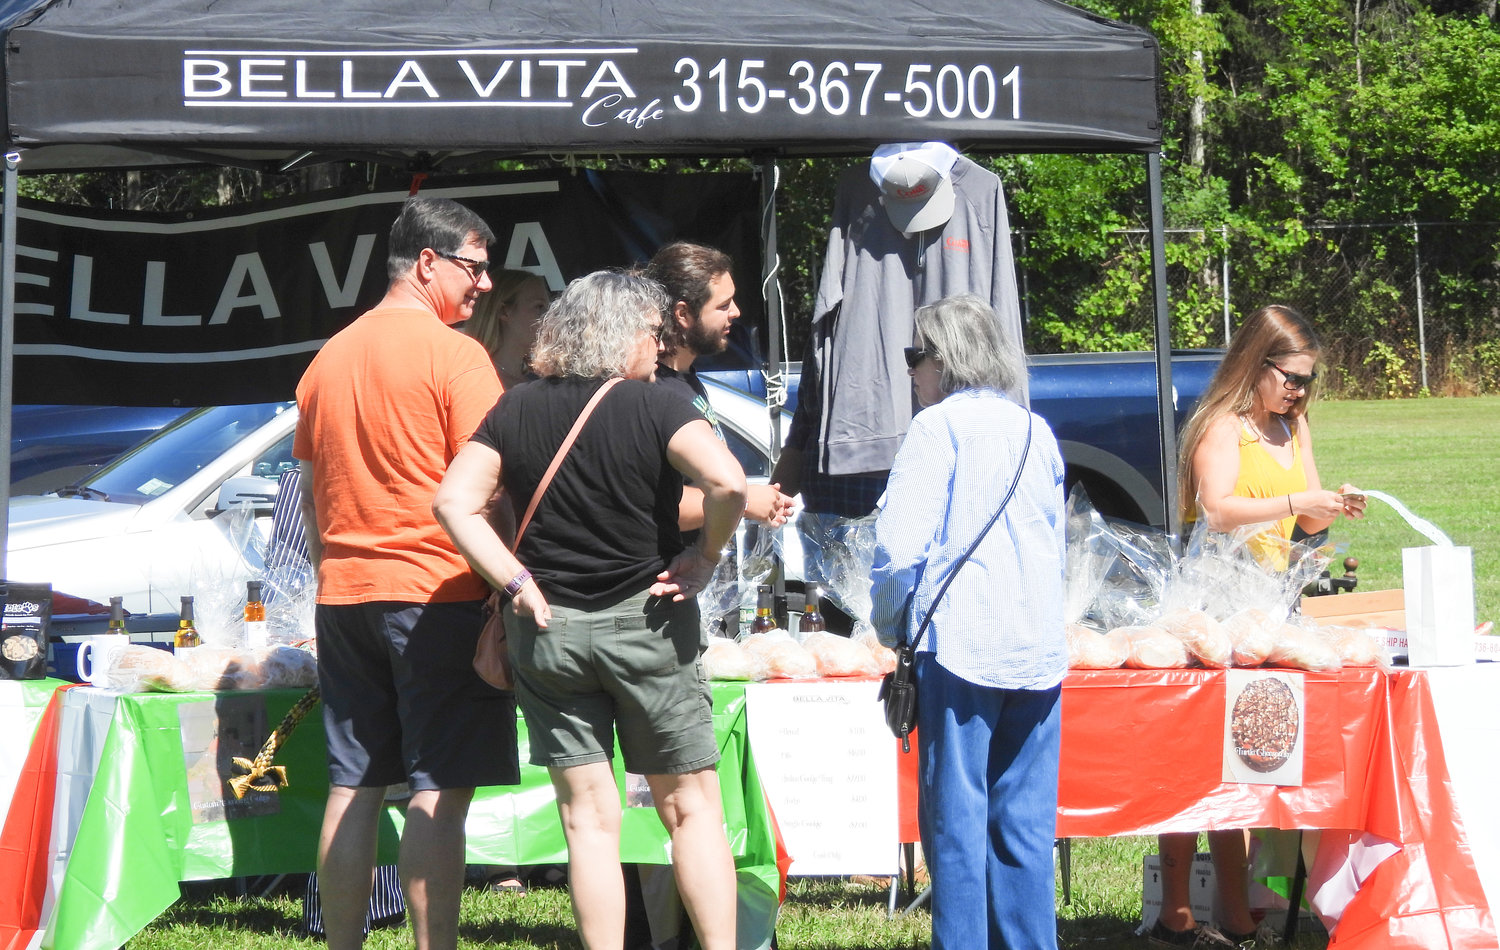 People sample and buy goods from Bella Vita at Wanderers' Rest's 2022 Woofstock fundraiser in Oneida on Saturday, Aug. 13.